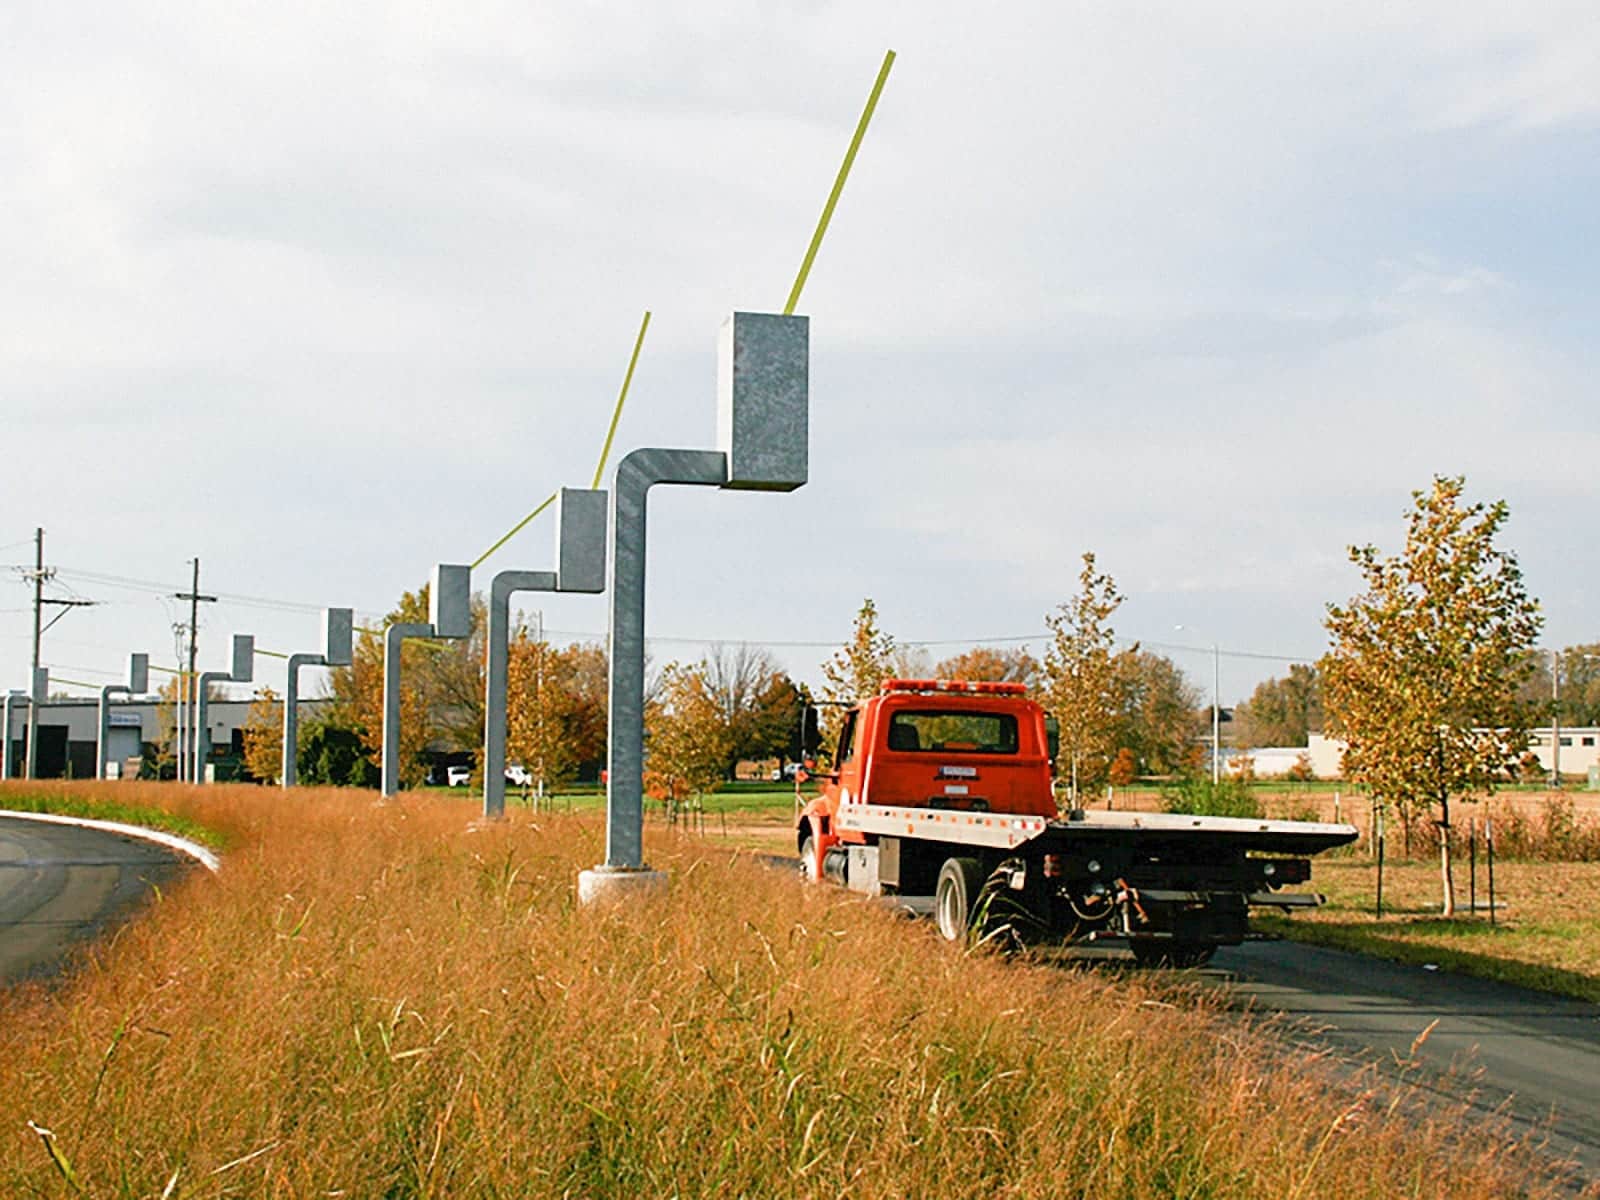 Seven Sentinels kinetic sculpture. Each of the parking gate sculptures salute exiting drivers.